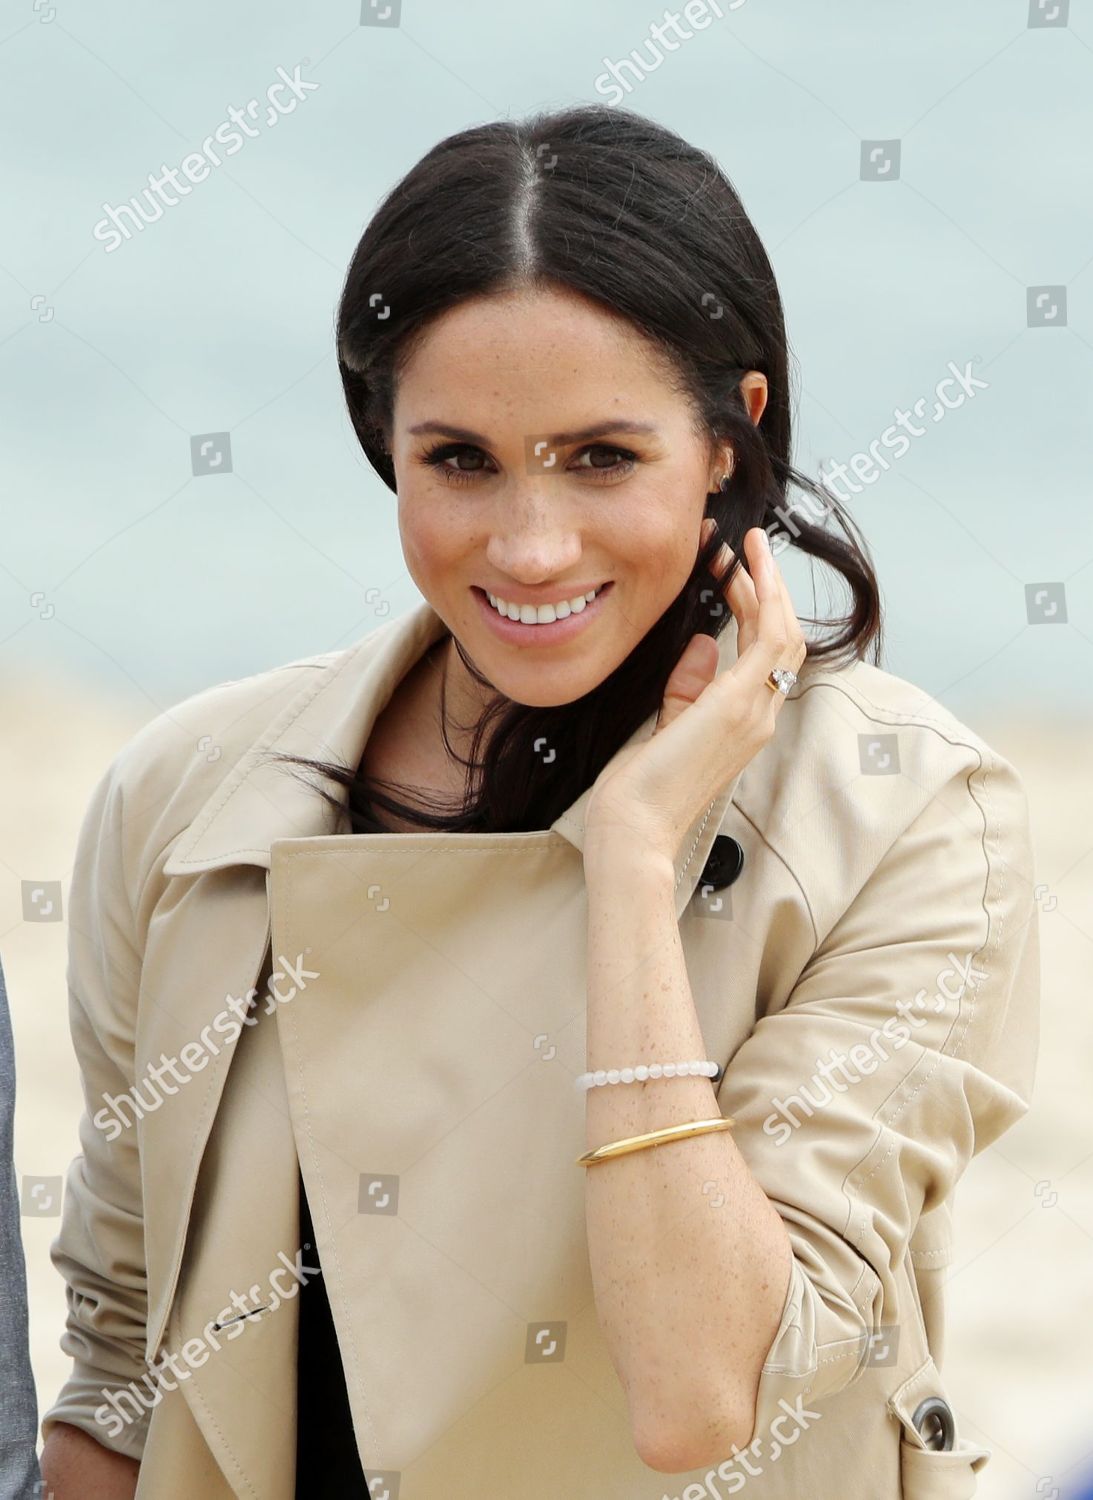 prince-harry-and-meghan-duchess-of-sussex-tour-of-australia-shutterstock-editorial-9936539dw.jpg